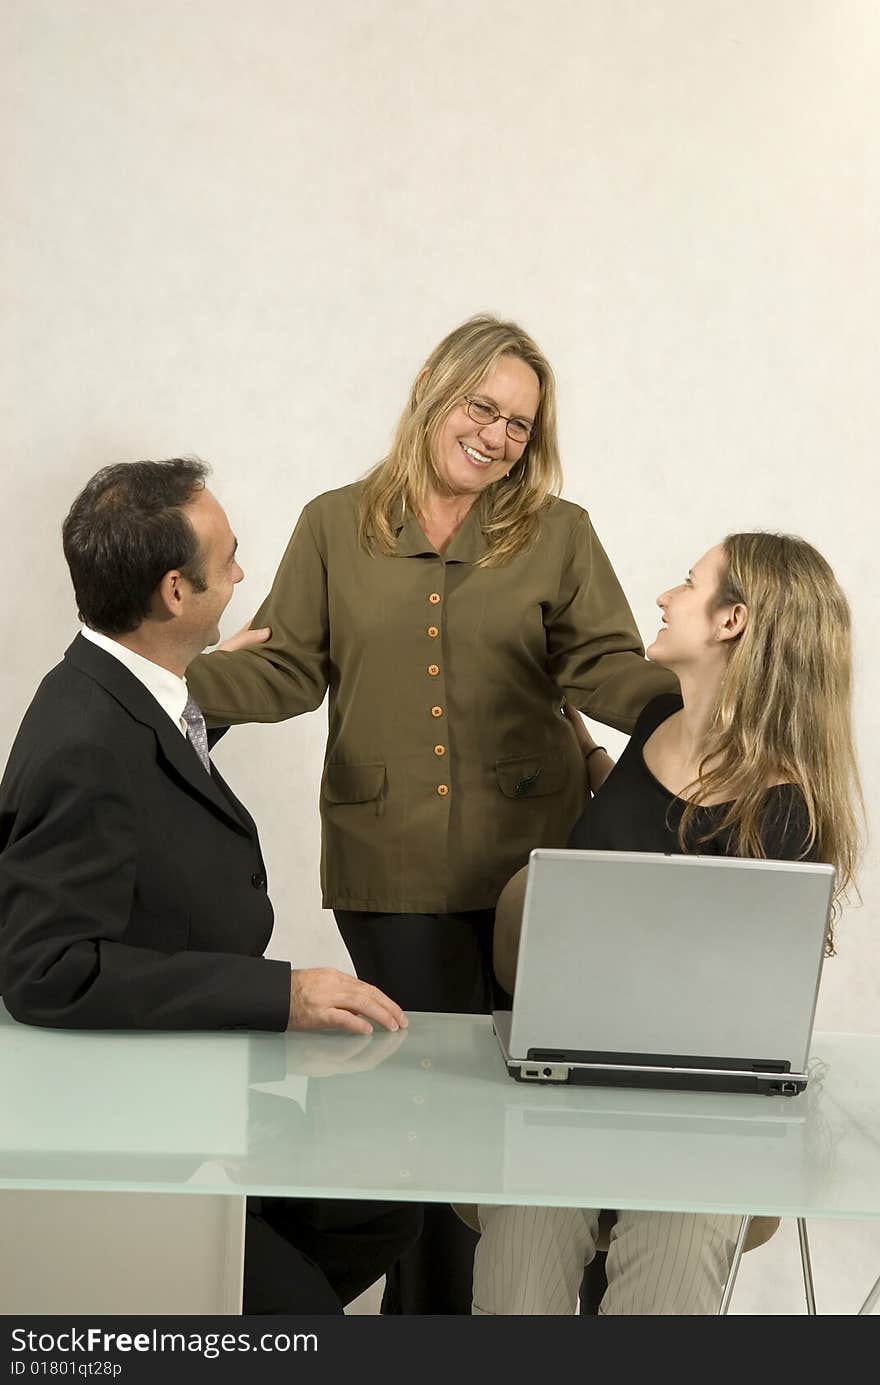 Three people are in a business meeting.  They are smiling and looking at each other.  There is a laptop on the table.  Vertically framed shot. Three people are in a business meeting.  They are smiling and looking at each other.  There is a laptop on the table.  Vertically framed shot.